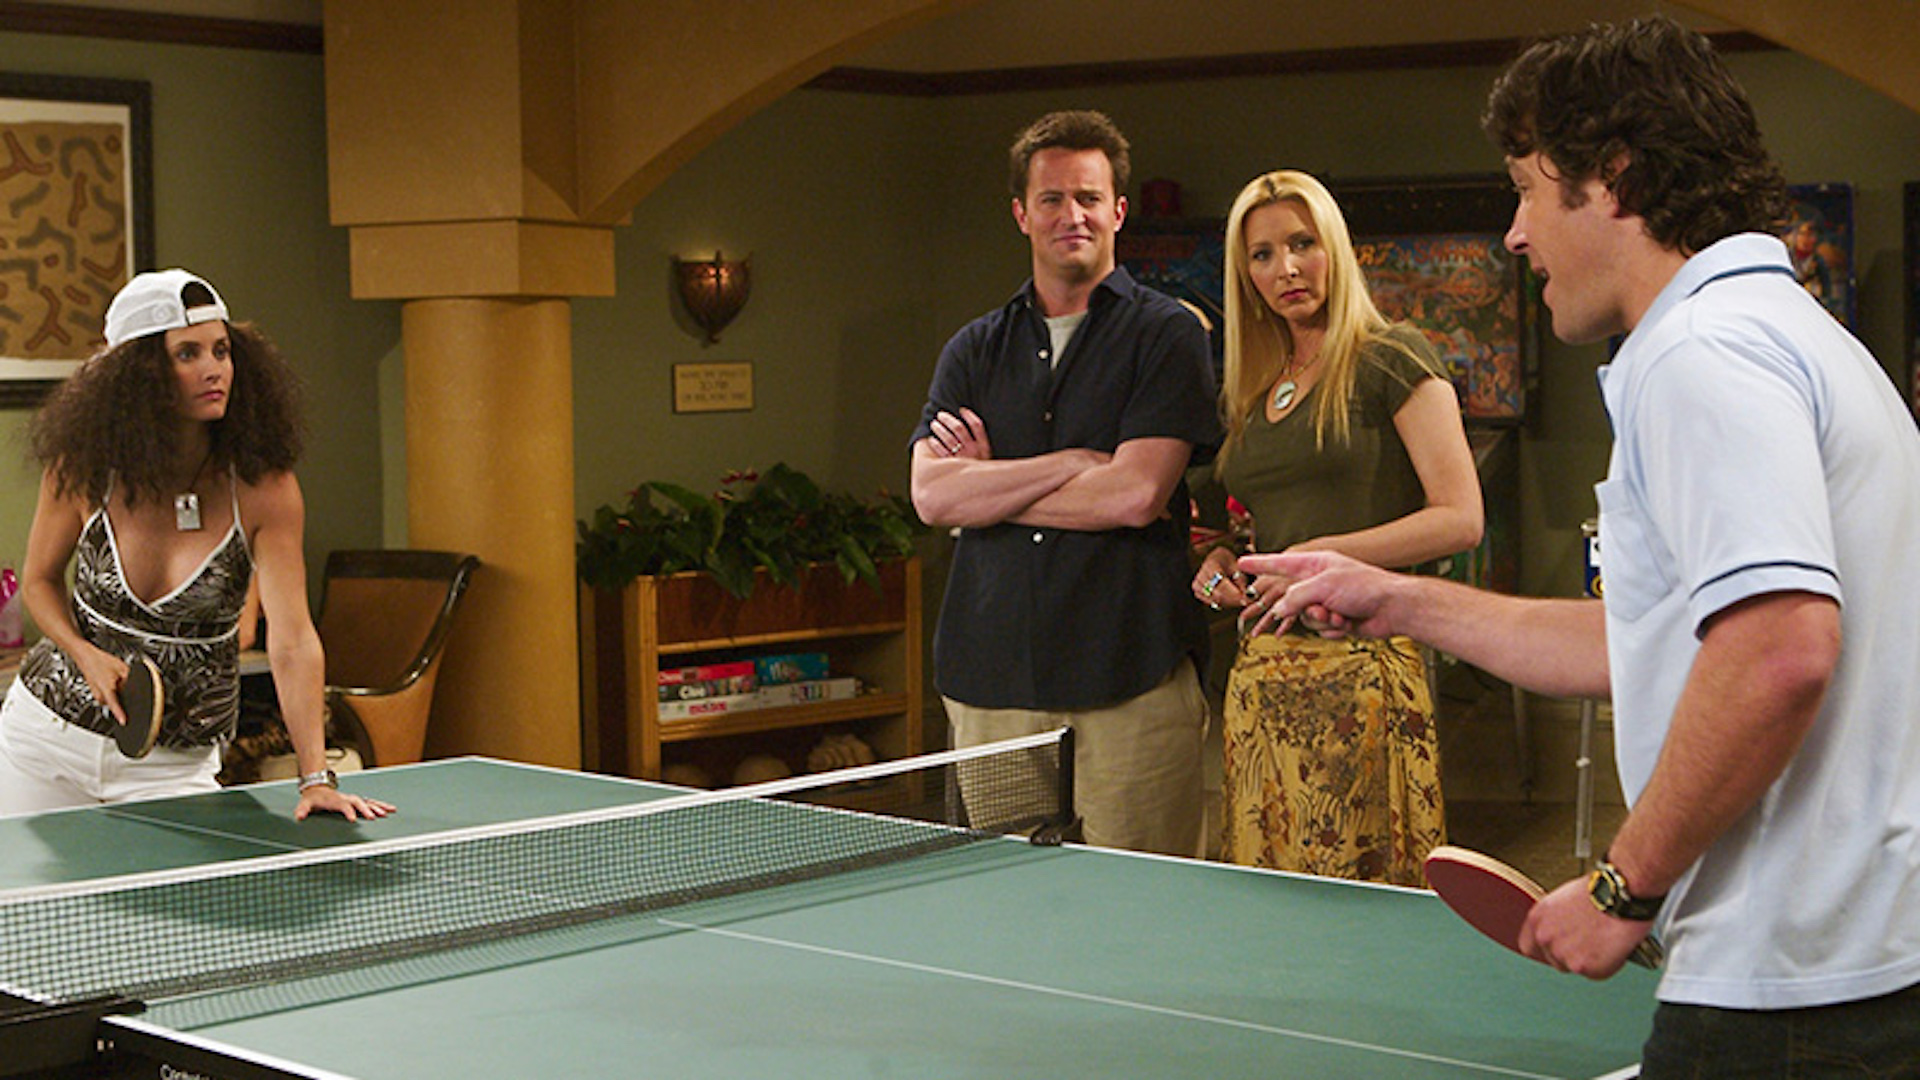 The Friends cast play table tennis